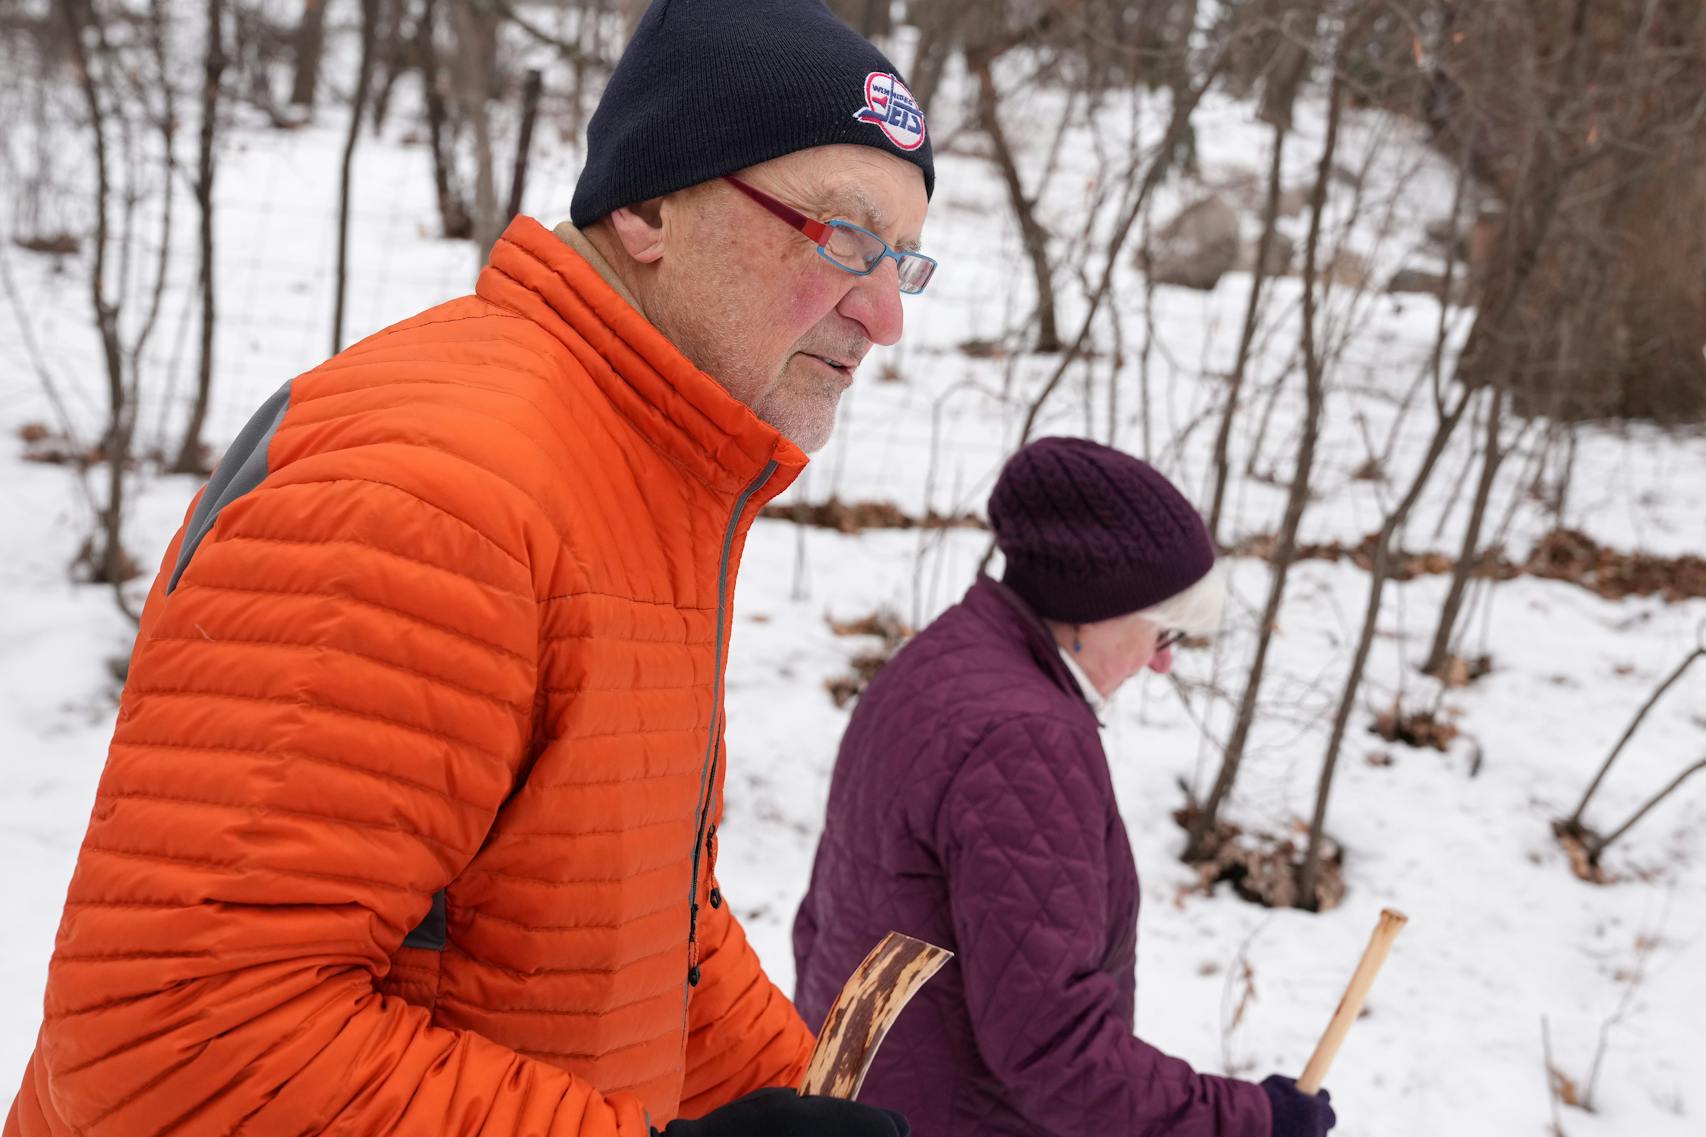 Dr. Richard Palahniuk was Minnesota’s first identified COVID-19 case two years ago. He eventually recovered, here walking with his wife, Patti, in Vadnais Heights.